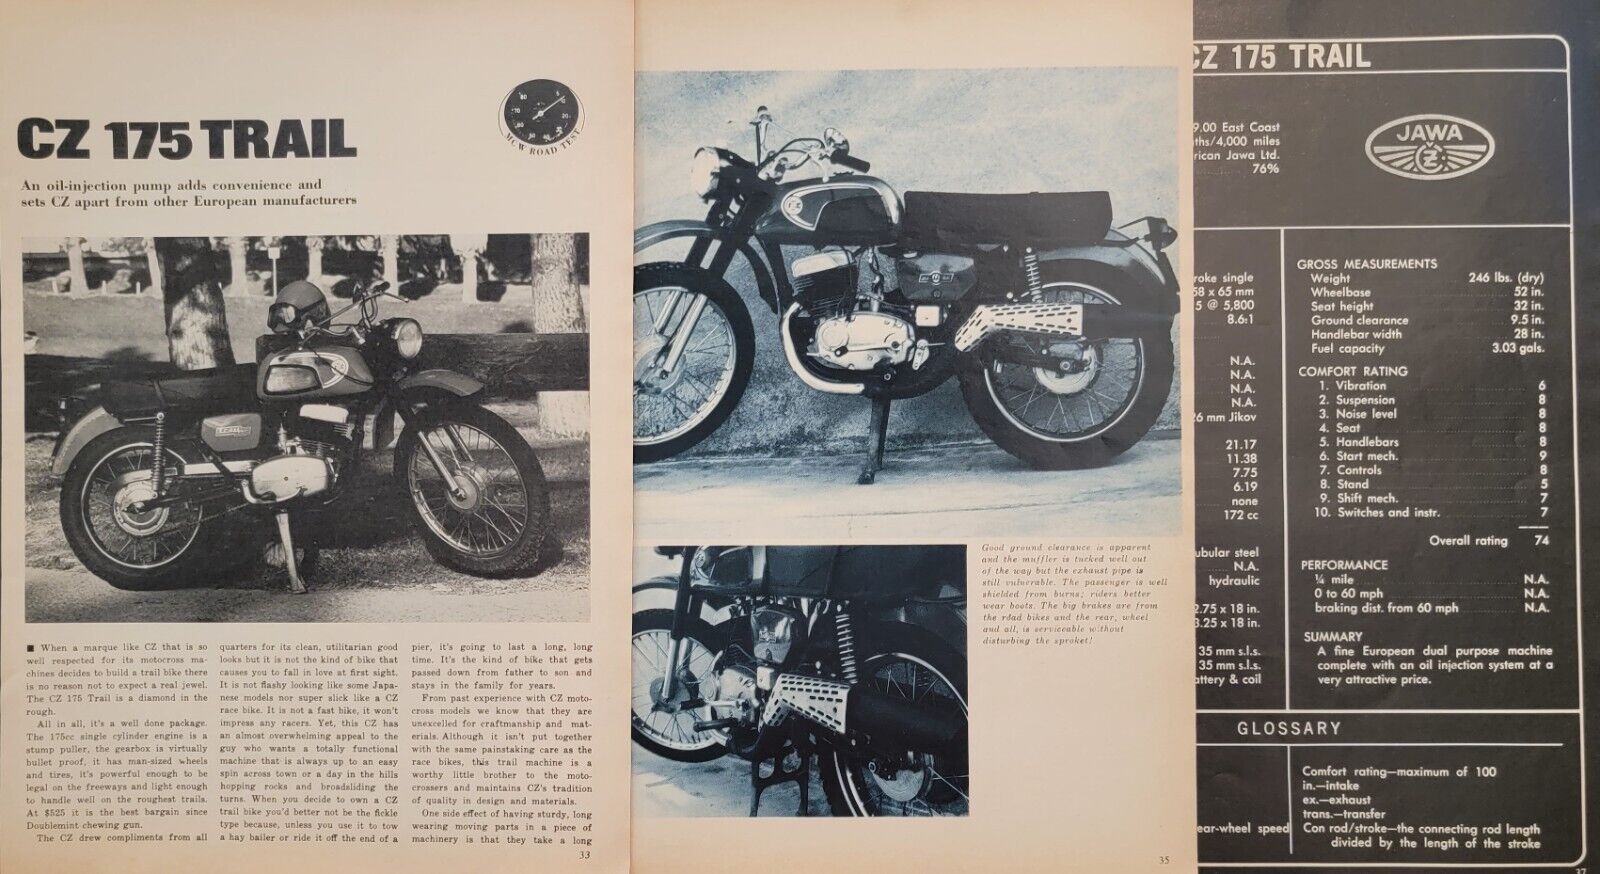 1971 CZ 175 Trail 5p Motorcycle test article